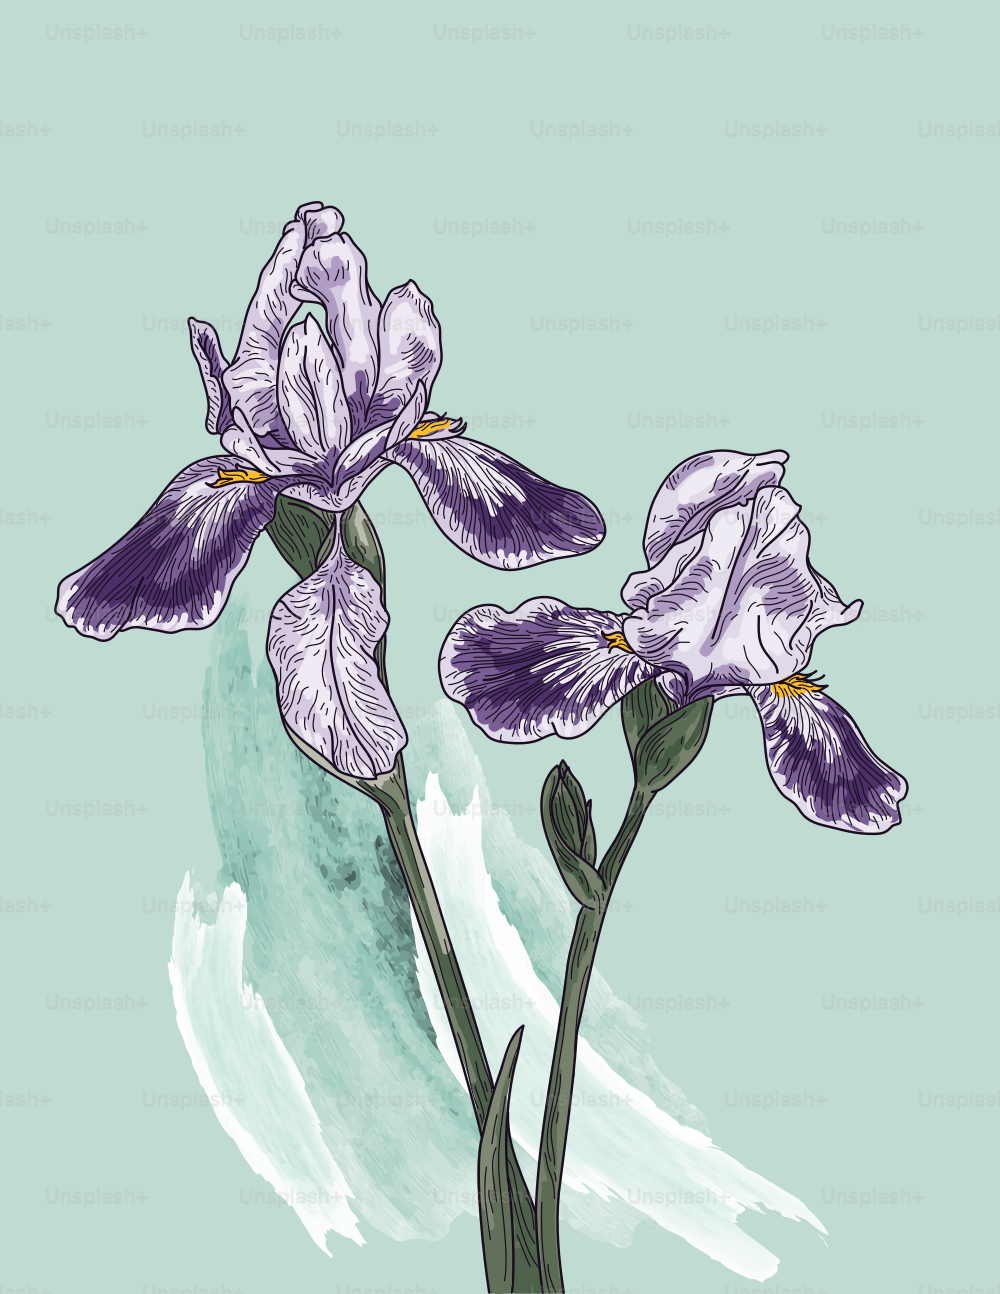 Elegant and detailed line artwork of iris flowers on a simple watercolour brush background.